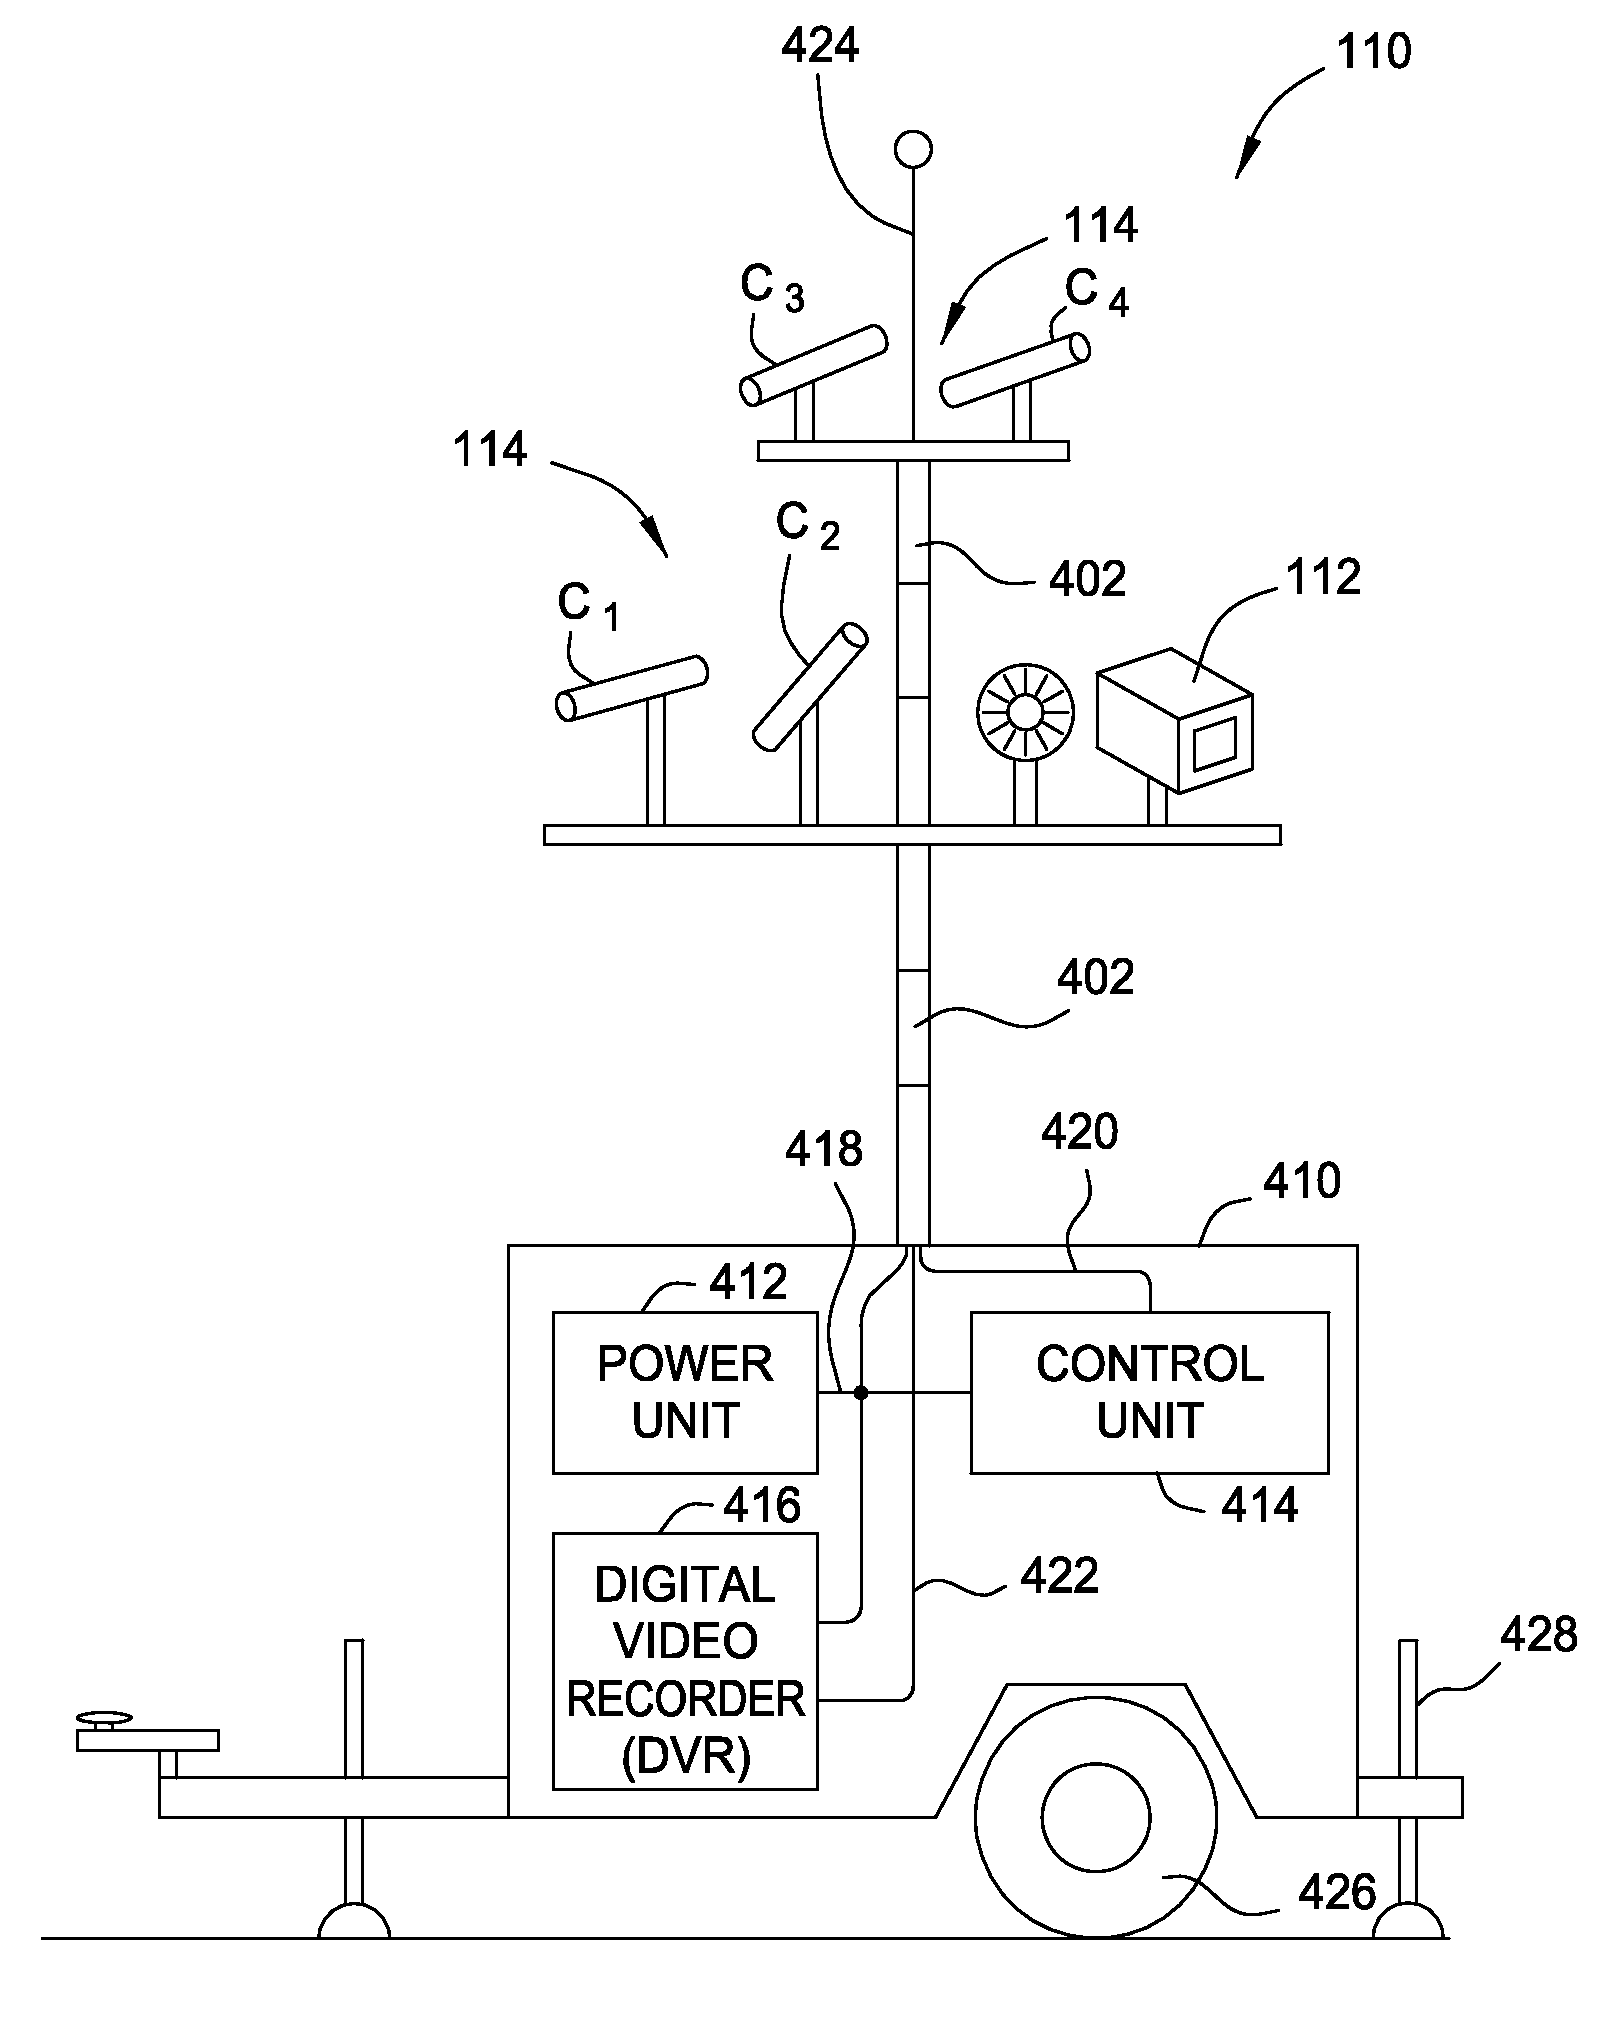 Portable traffic monitoring system and methods for use